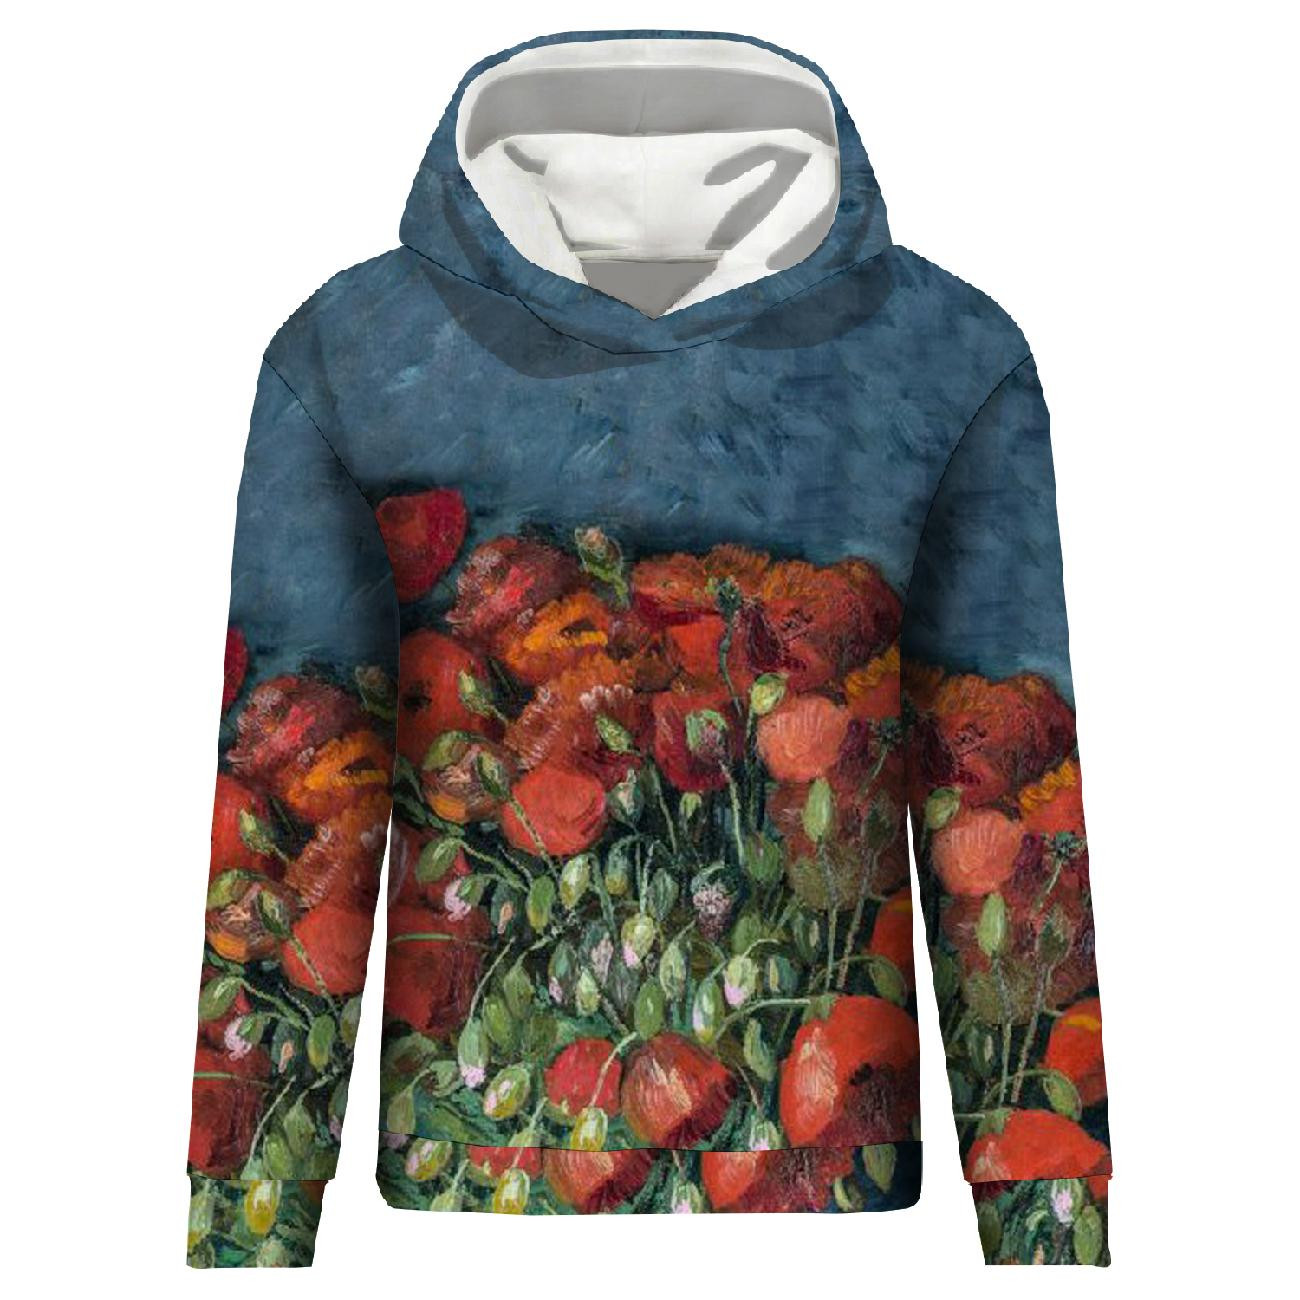 CLASSIC WOMEN’S HOODIE (POLA) - VASE WITH POPPIES (Vincent van Gogh) - sewing set